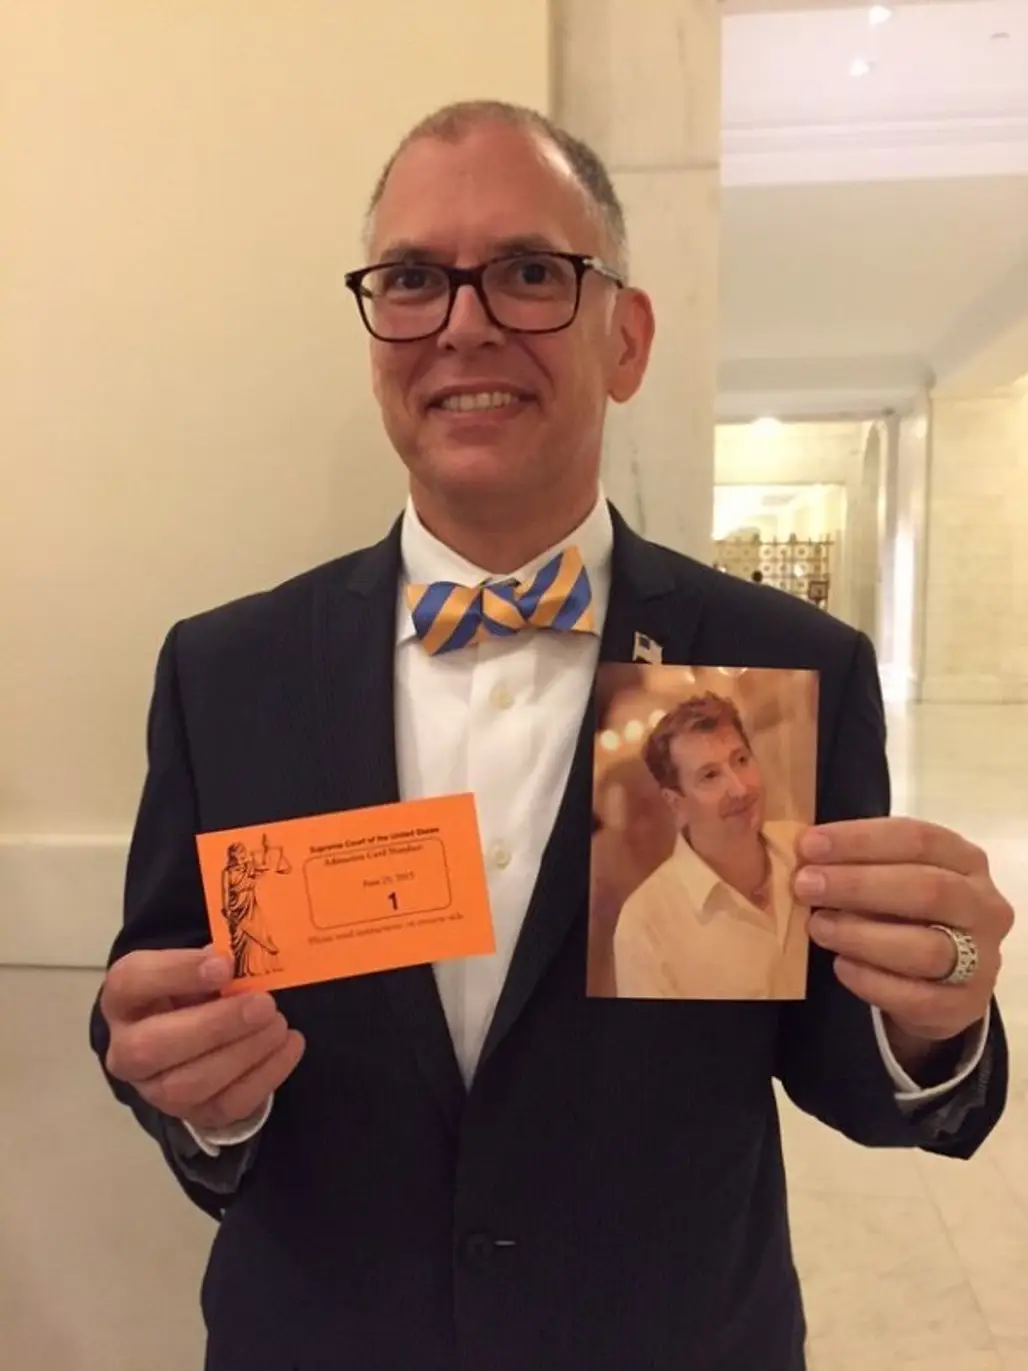 Jim Obergefell Emerged Victorious and Love Won as a Result